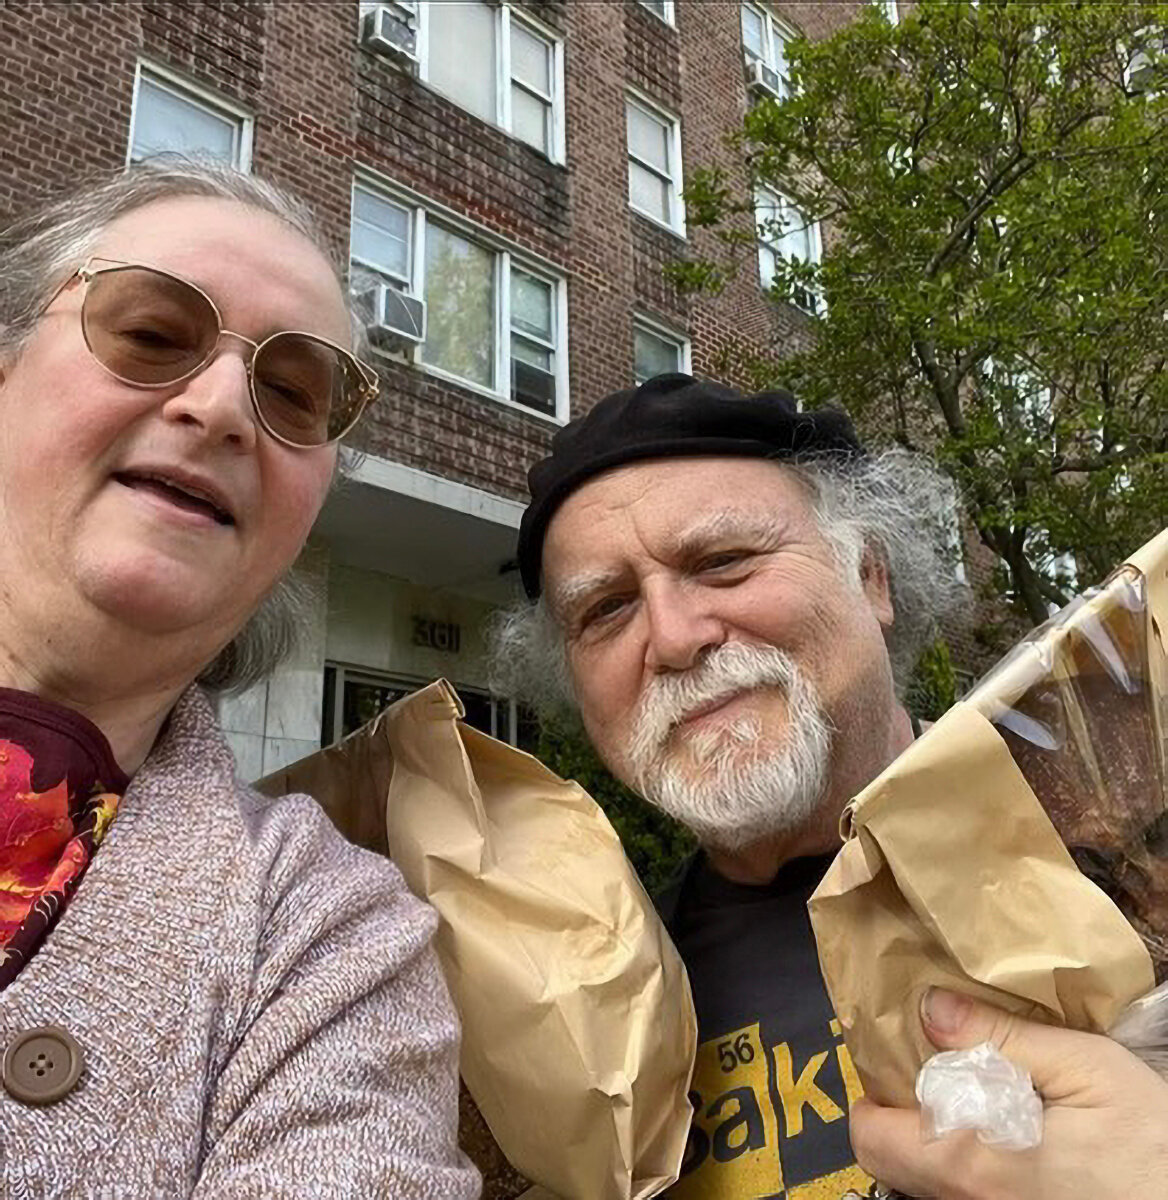 The Bread Baker of Riverdale Arnie Adler takes a selfie with Elayne Riggs, below, at the Riverdale Restaurant Week, which was held April 15-22. He was one of the many volunteers and 33 restaurant owners who took part. Throughout the week, there were artists and music doing their thing, including a Mariachi band that walked from restaurant to restaurant. For the Friendly Fridge BX, DineOut Riverdale made 231 sandwiches, rice and beans meals and donated fresh produce, water bottles and juice and more than 300 Ramen packages. In addition, the organization will write a check for $515 to the Friendly Fridge. Sponsors included Artizen, Tierneys, Emilianos, Just One Pop Away, Addeo's, Lea Torres cookies, PrayEatBakeLove, Arnie Adler, Godwin Terrace Coffee and Tex Mex and KRVC.